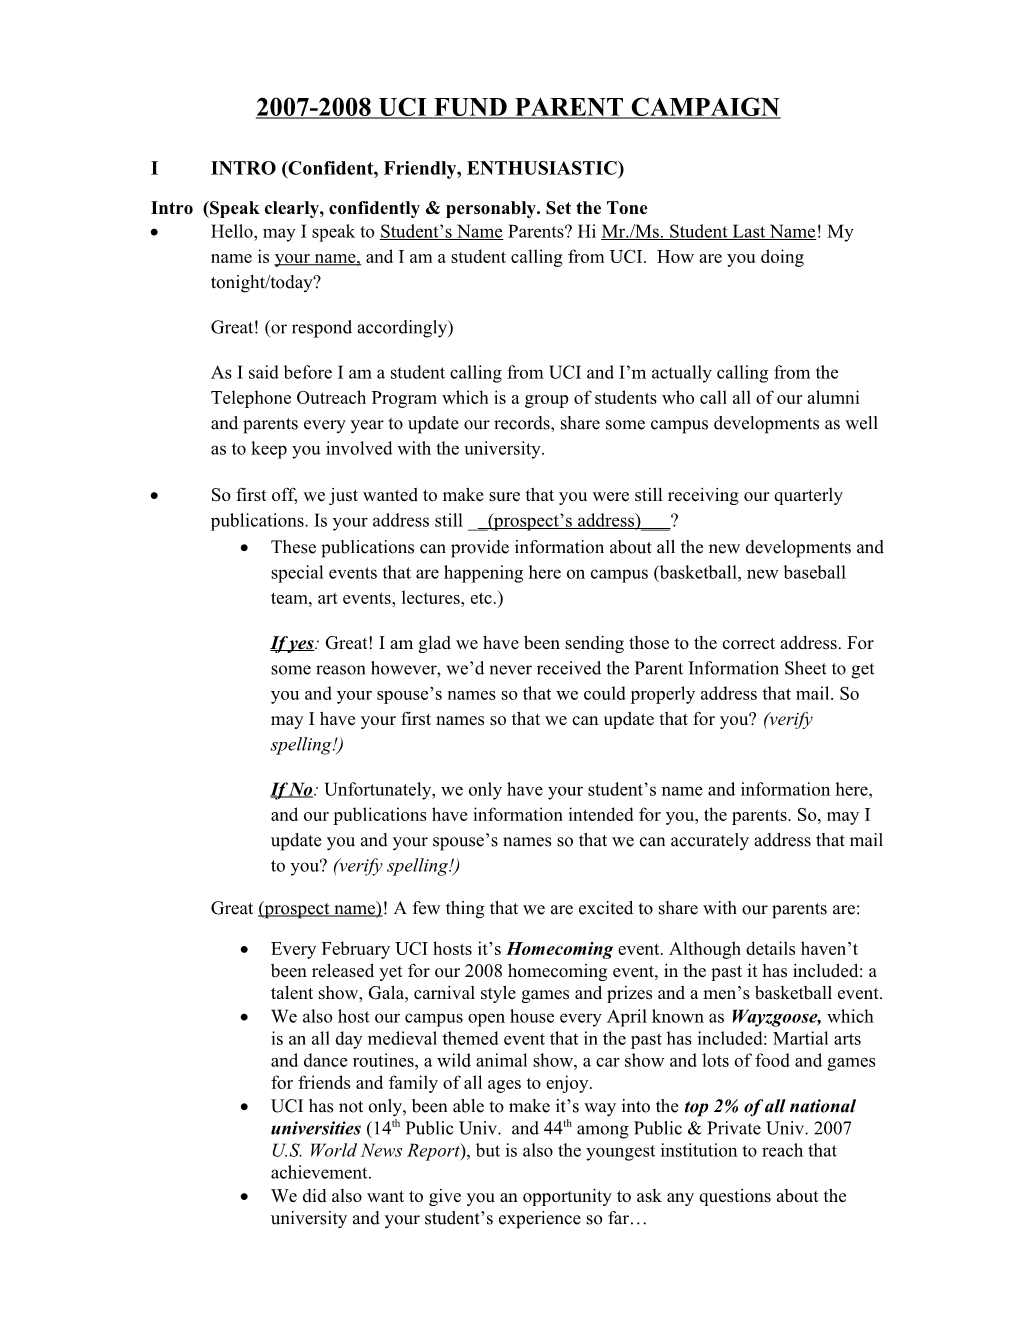 FY08 Parent New Strategy Sheet